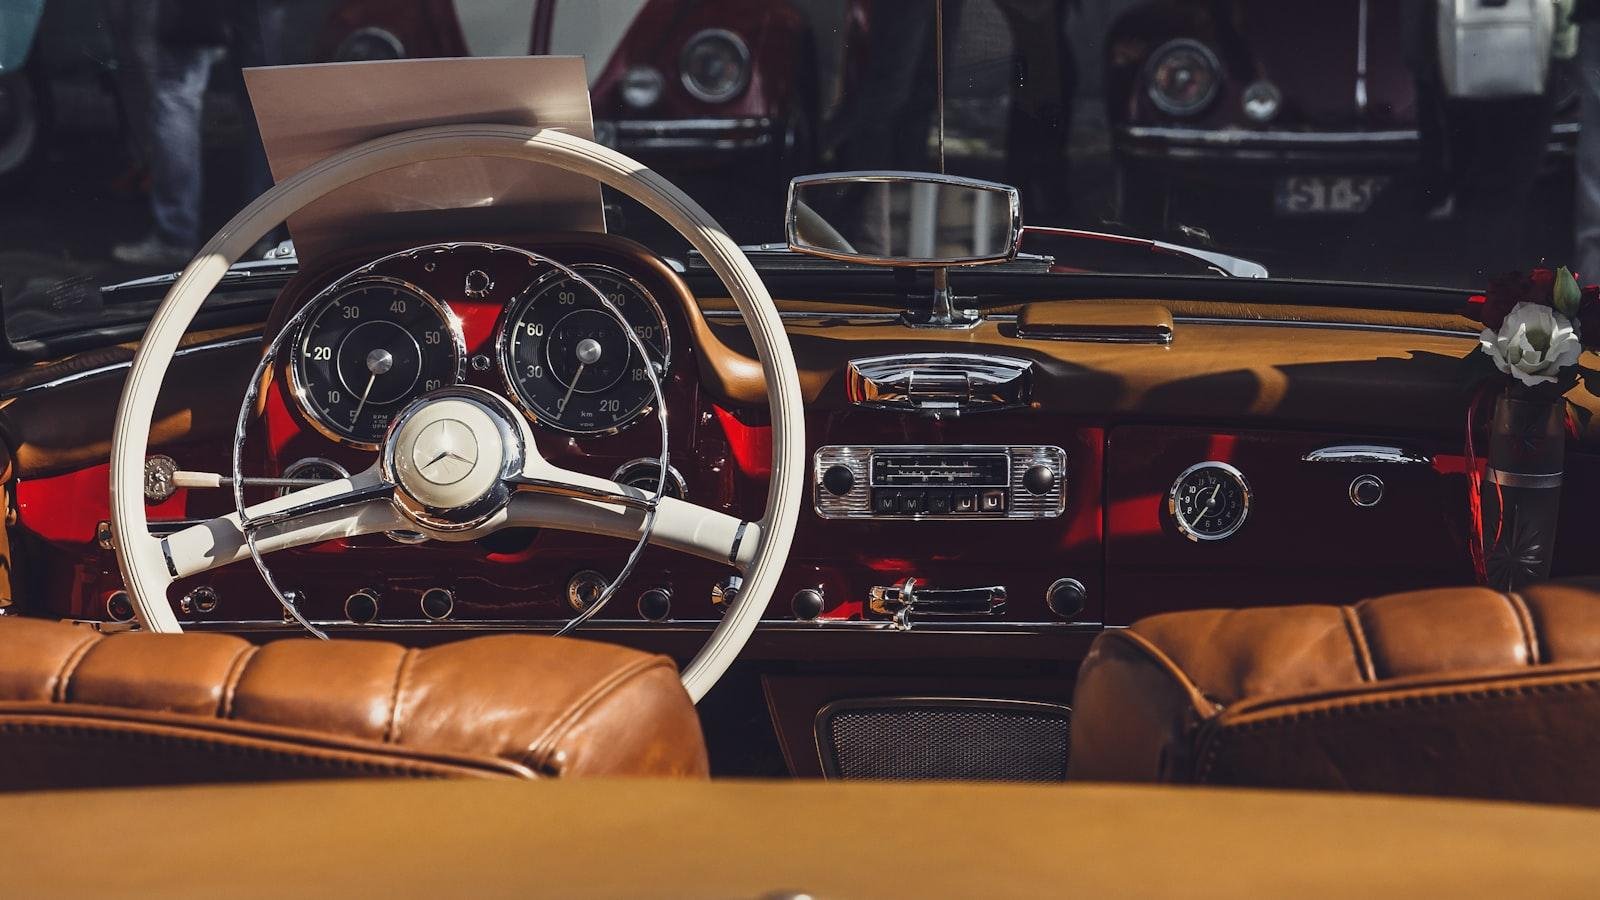 Embracing Classic Cars: A Dreamy Ride Down Memory Lane